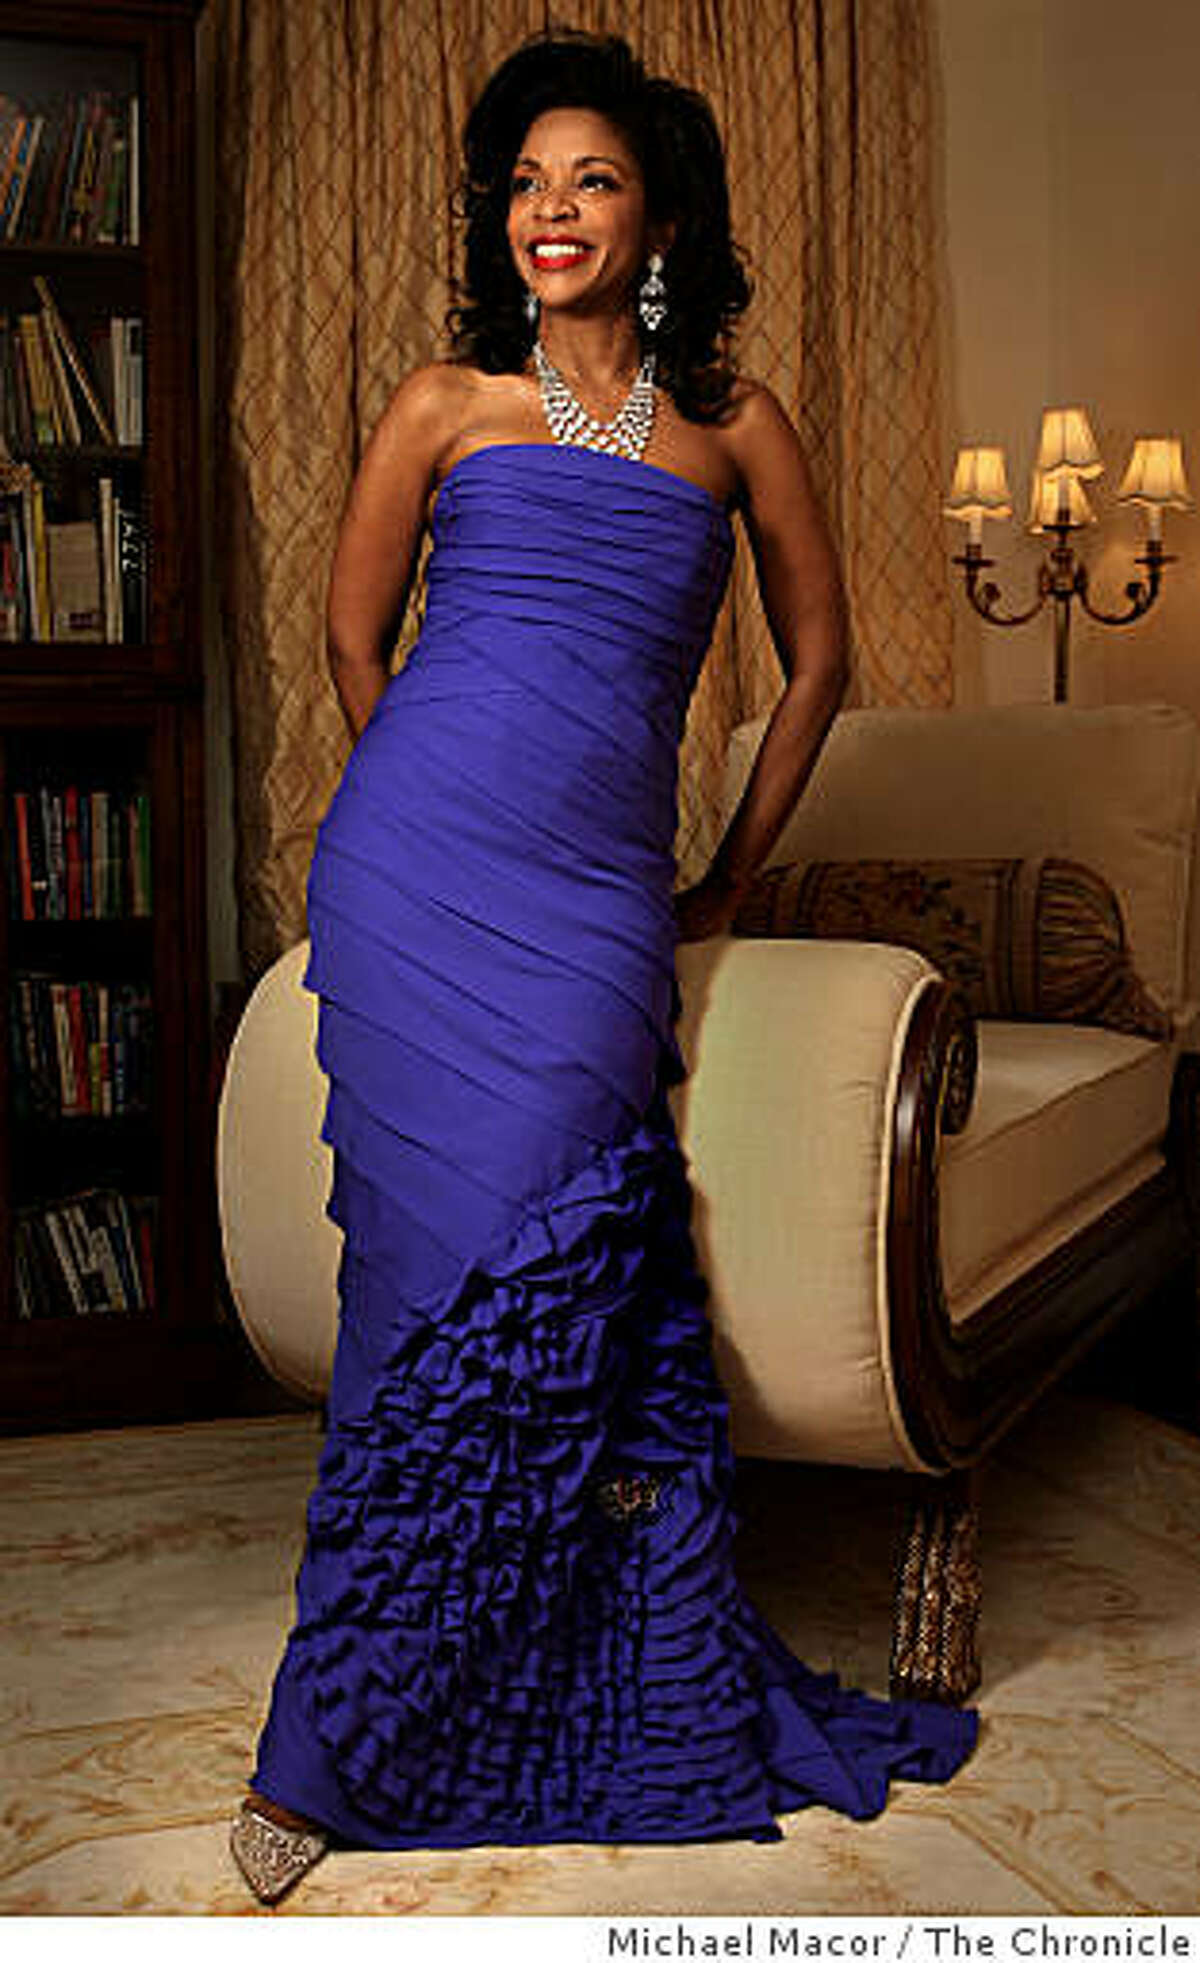 Pamela Joyner will be bringing several gowns and suits by local designer Azadeh of San Francisco. Joyner at her San Francisco home on Tuesday Jan. 13, 2009, in San Francisco, Calif.